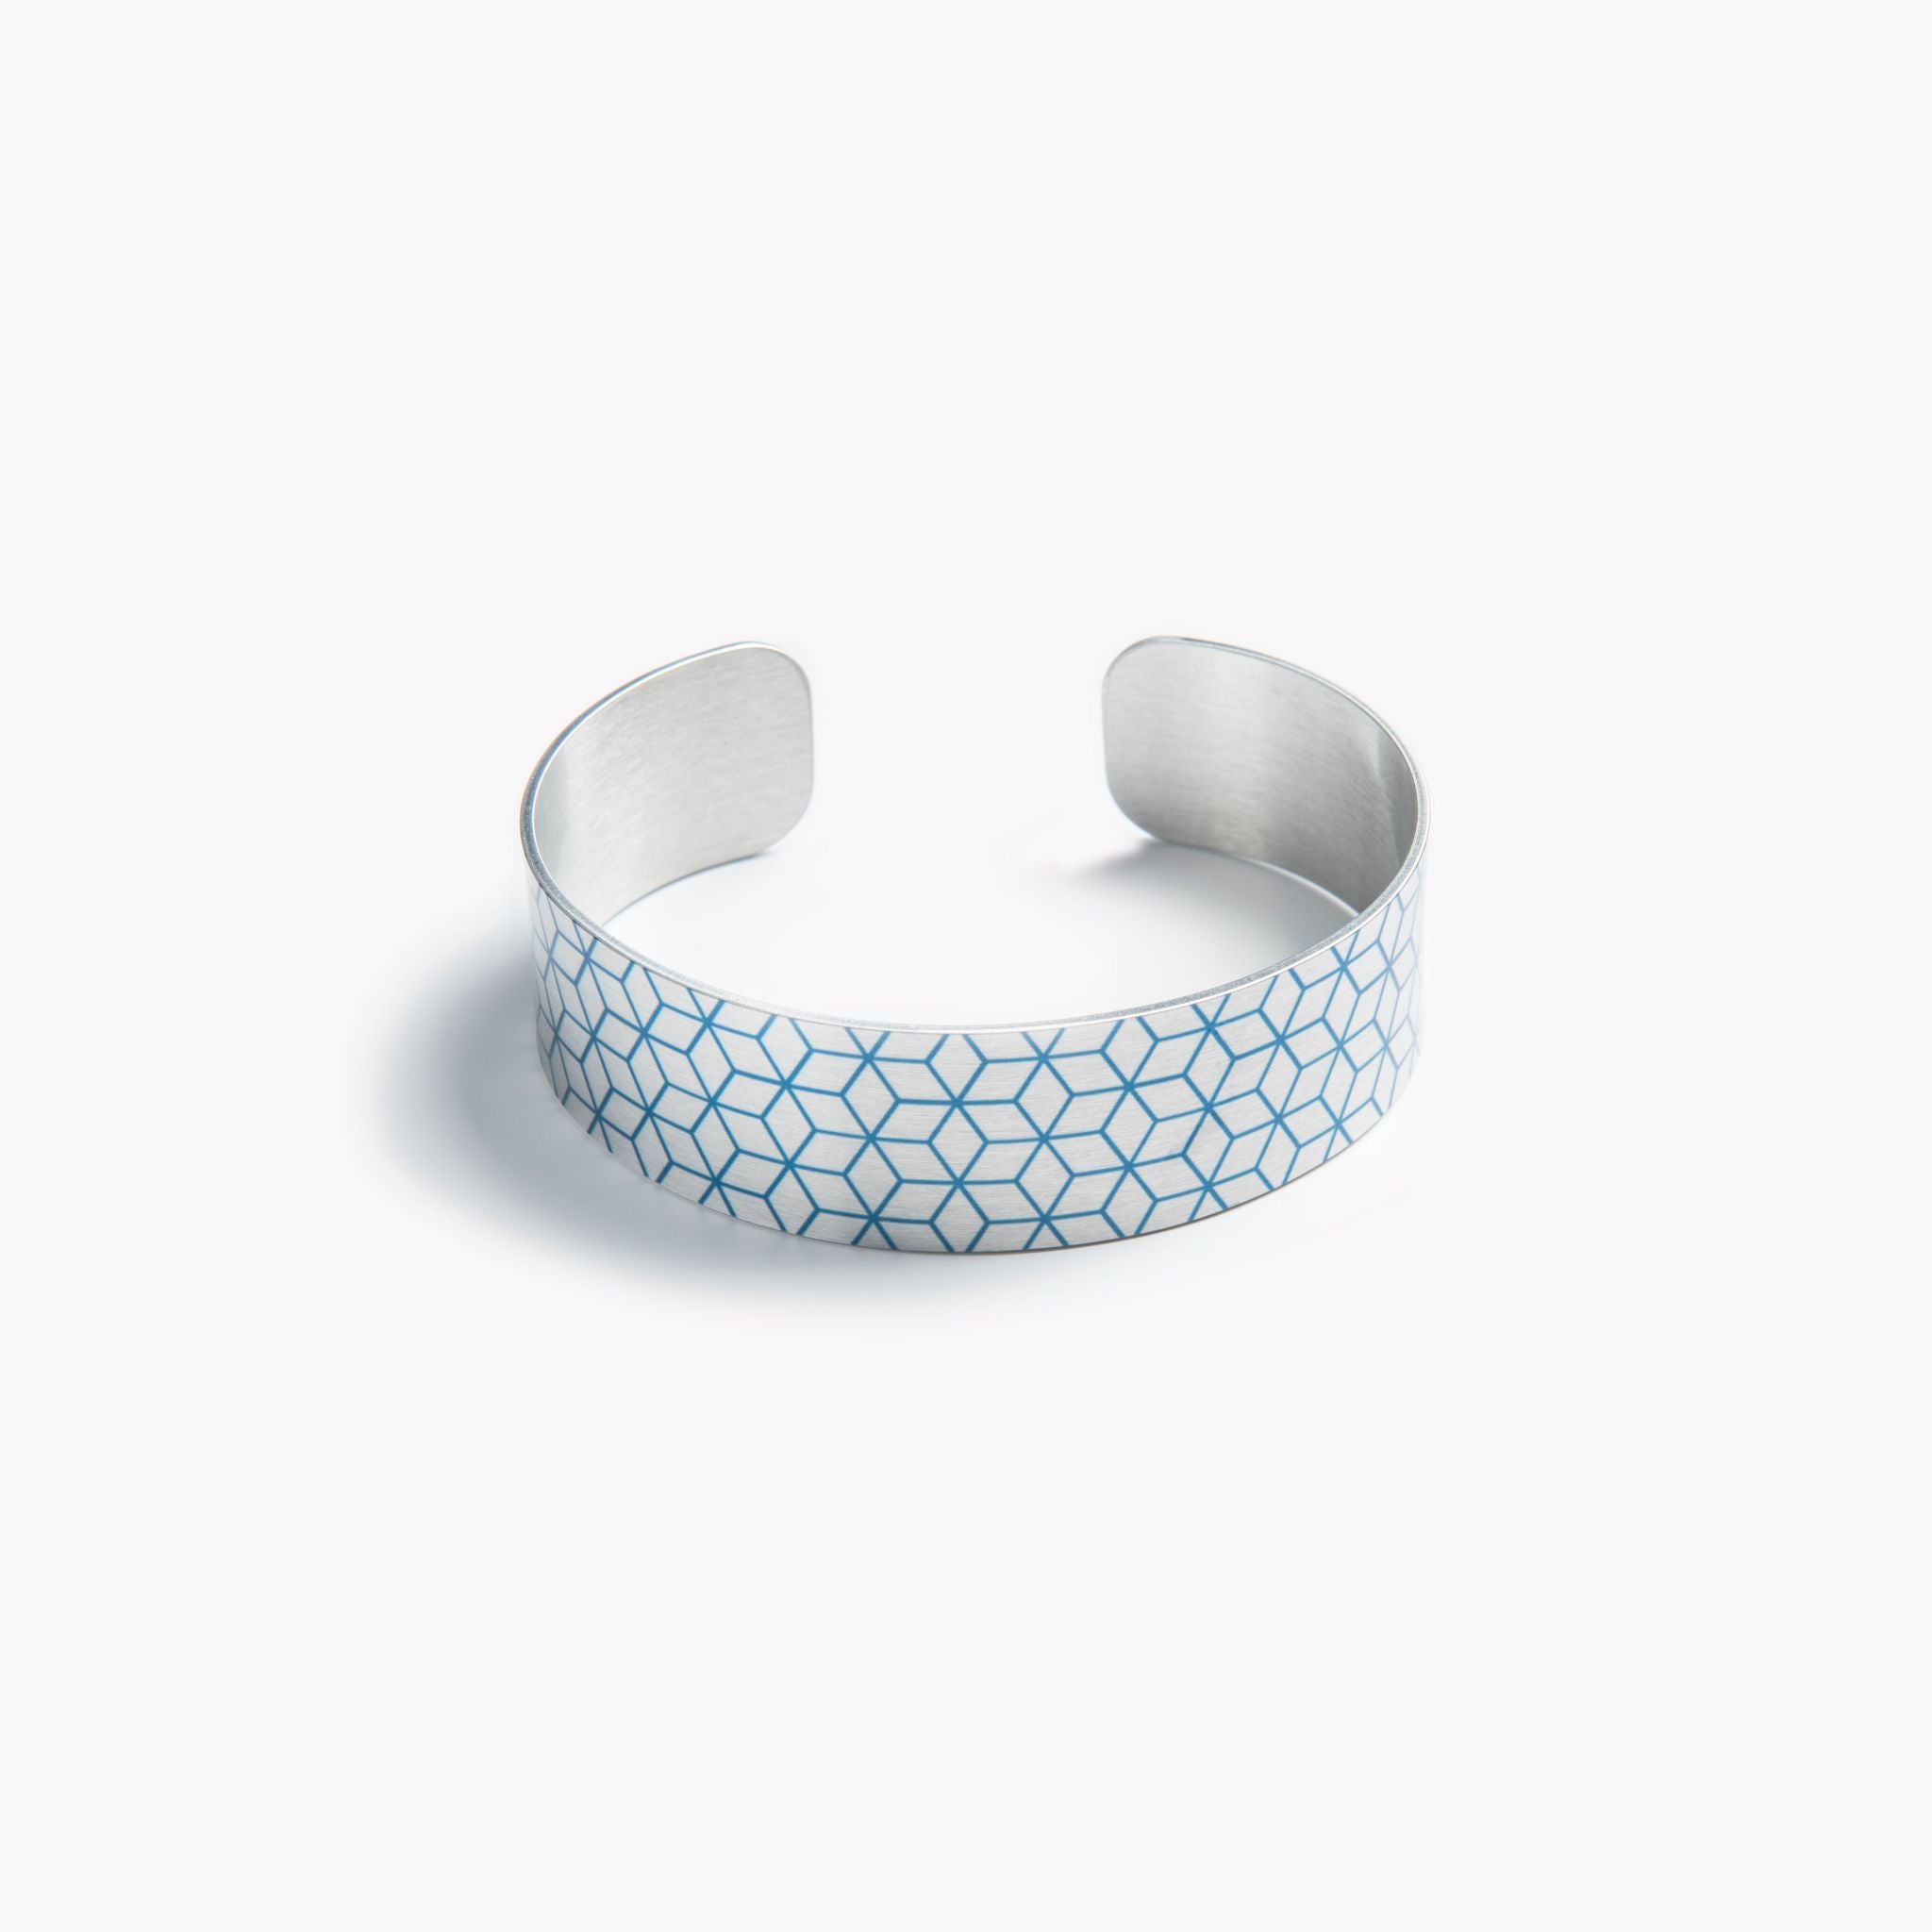 An intricately detailed cuff bracelet with a teal geometric pattern.